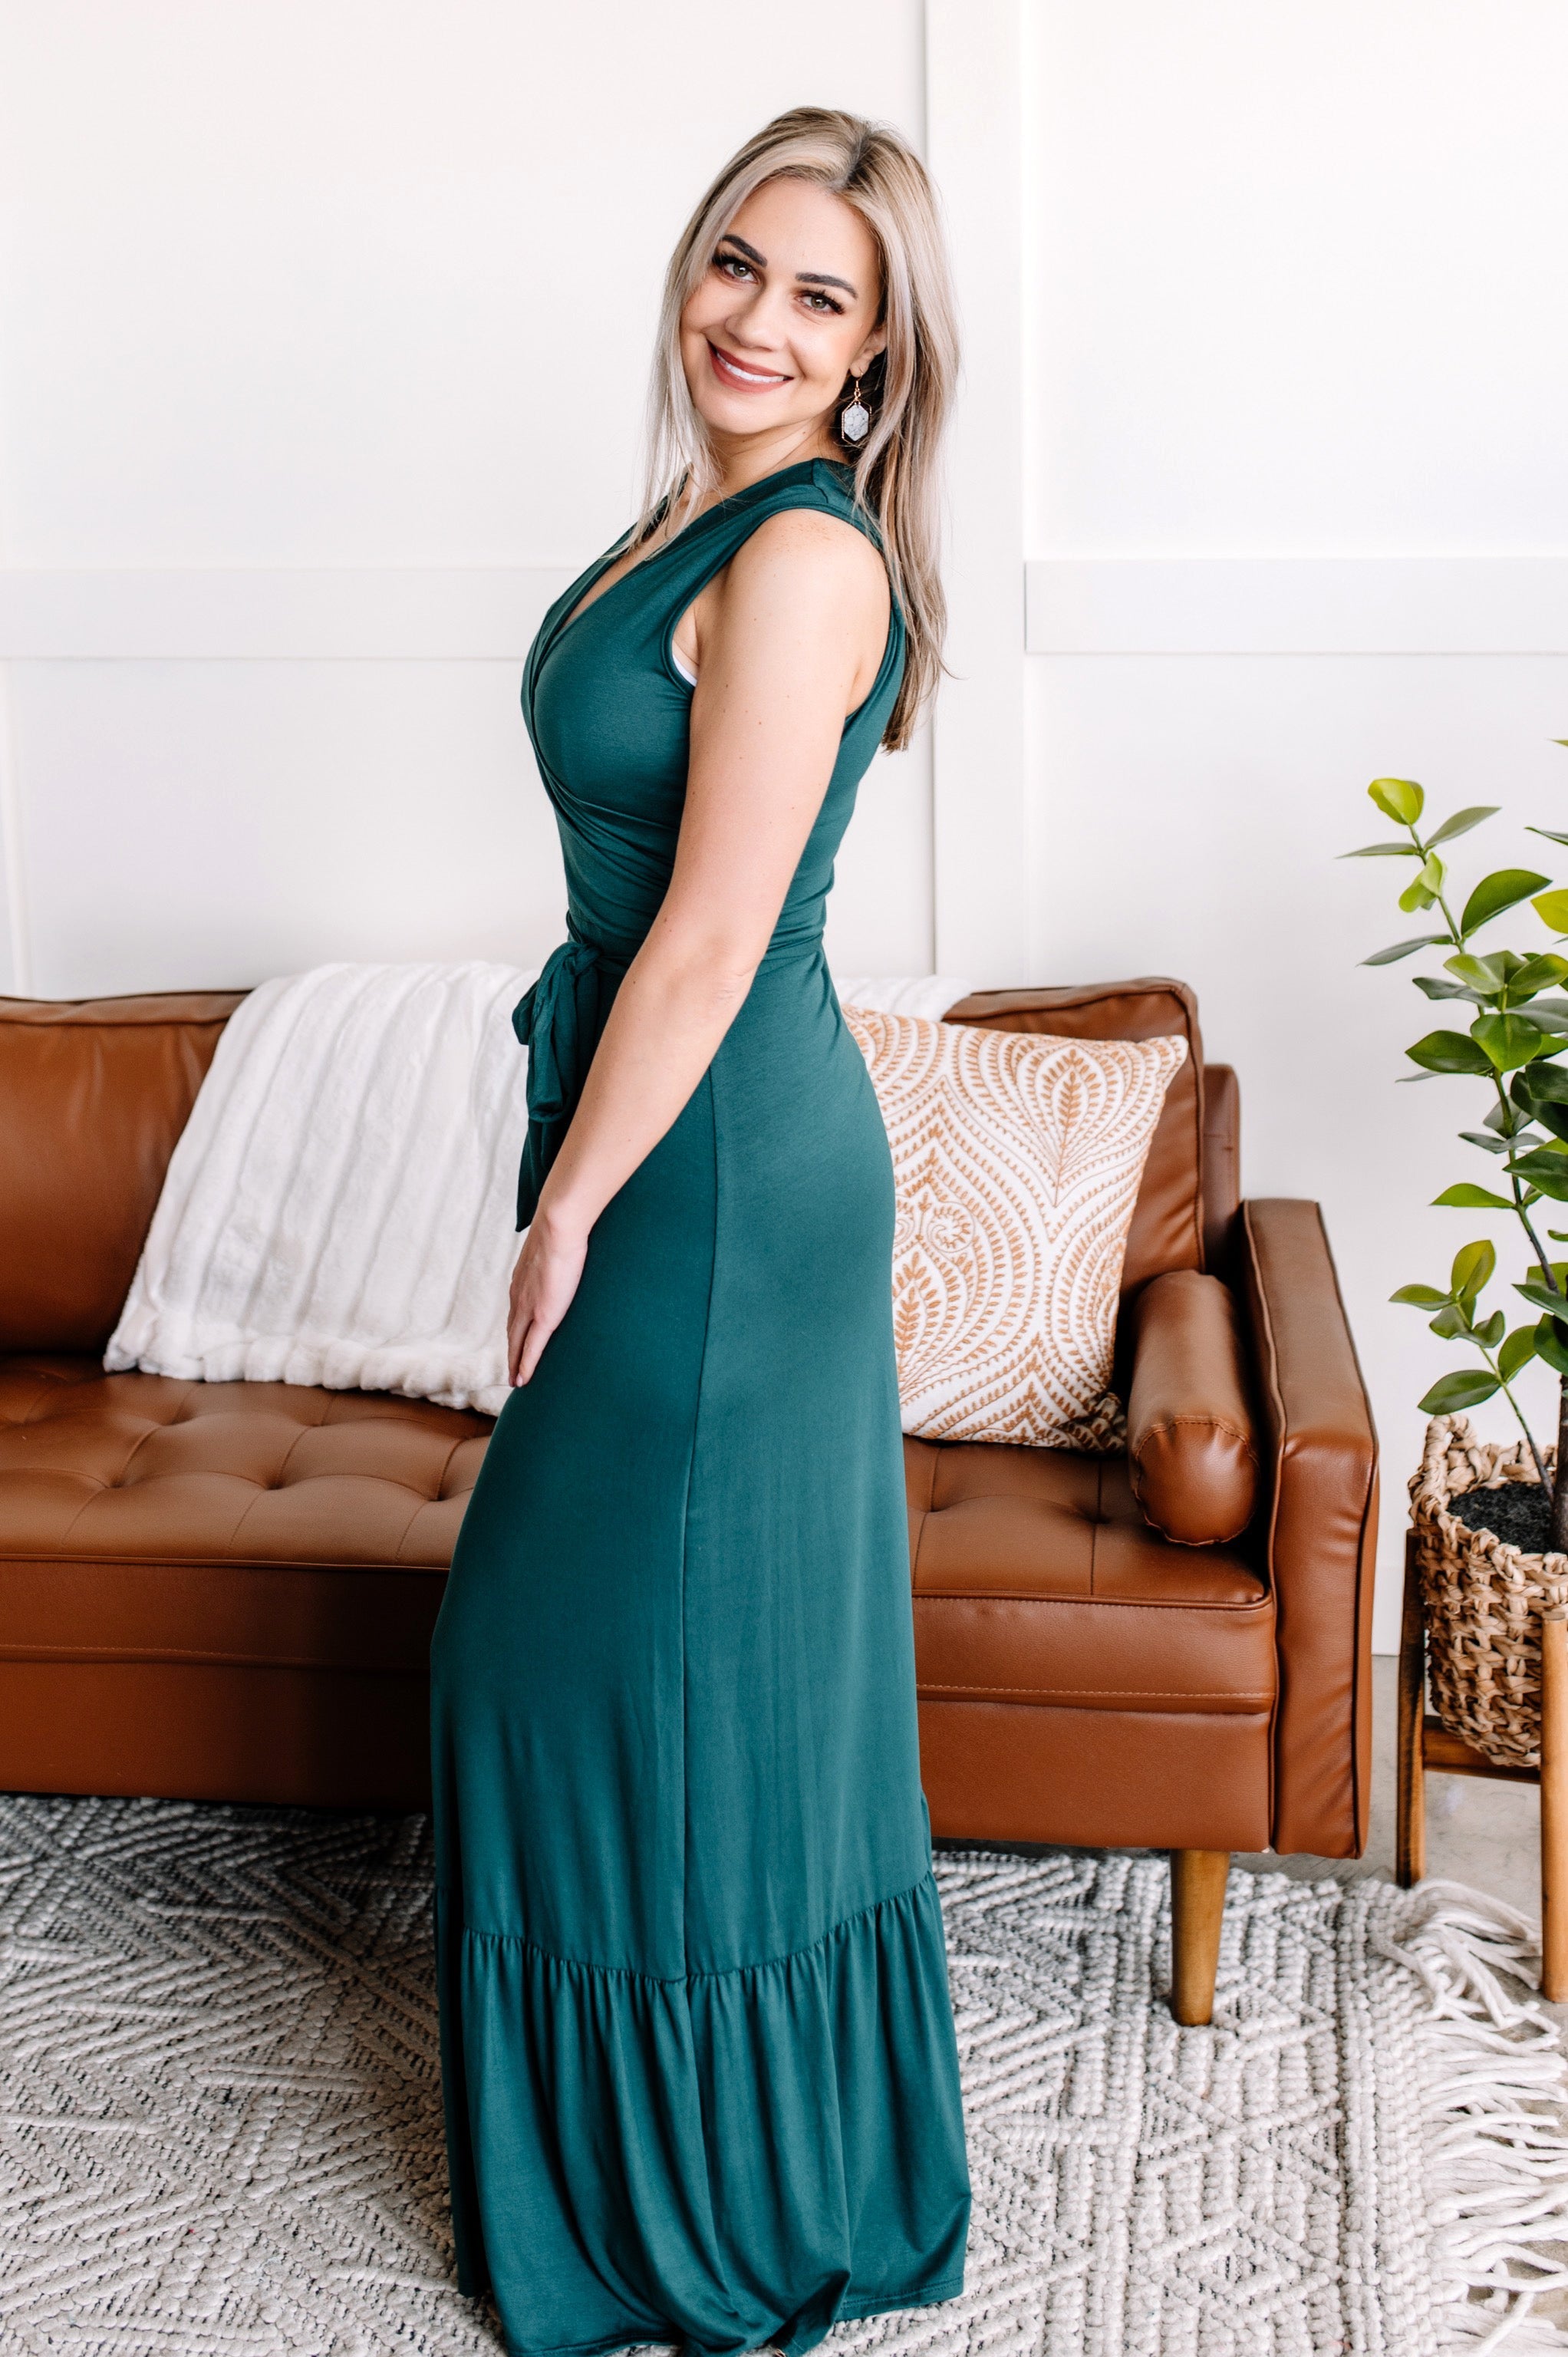 To The Other Side Maxi Dress in Hunter Green